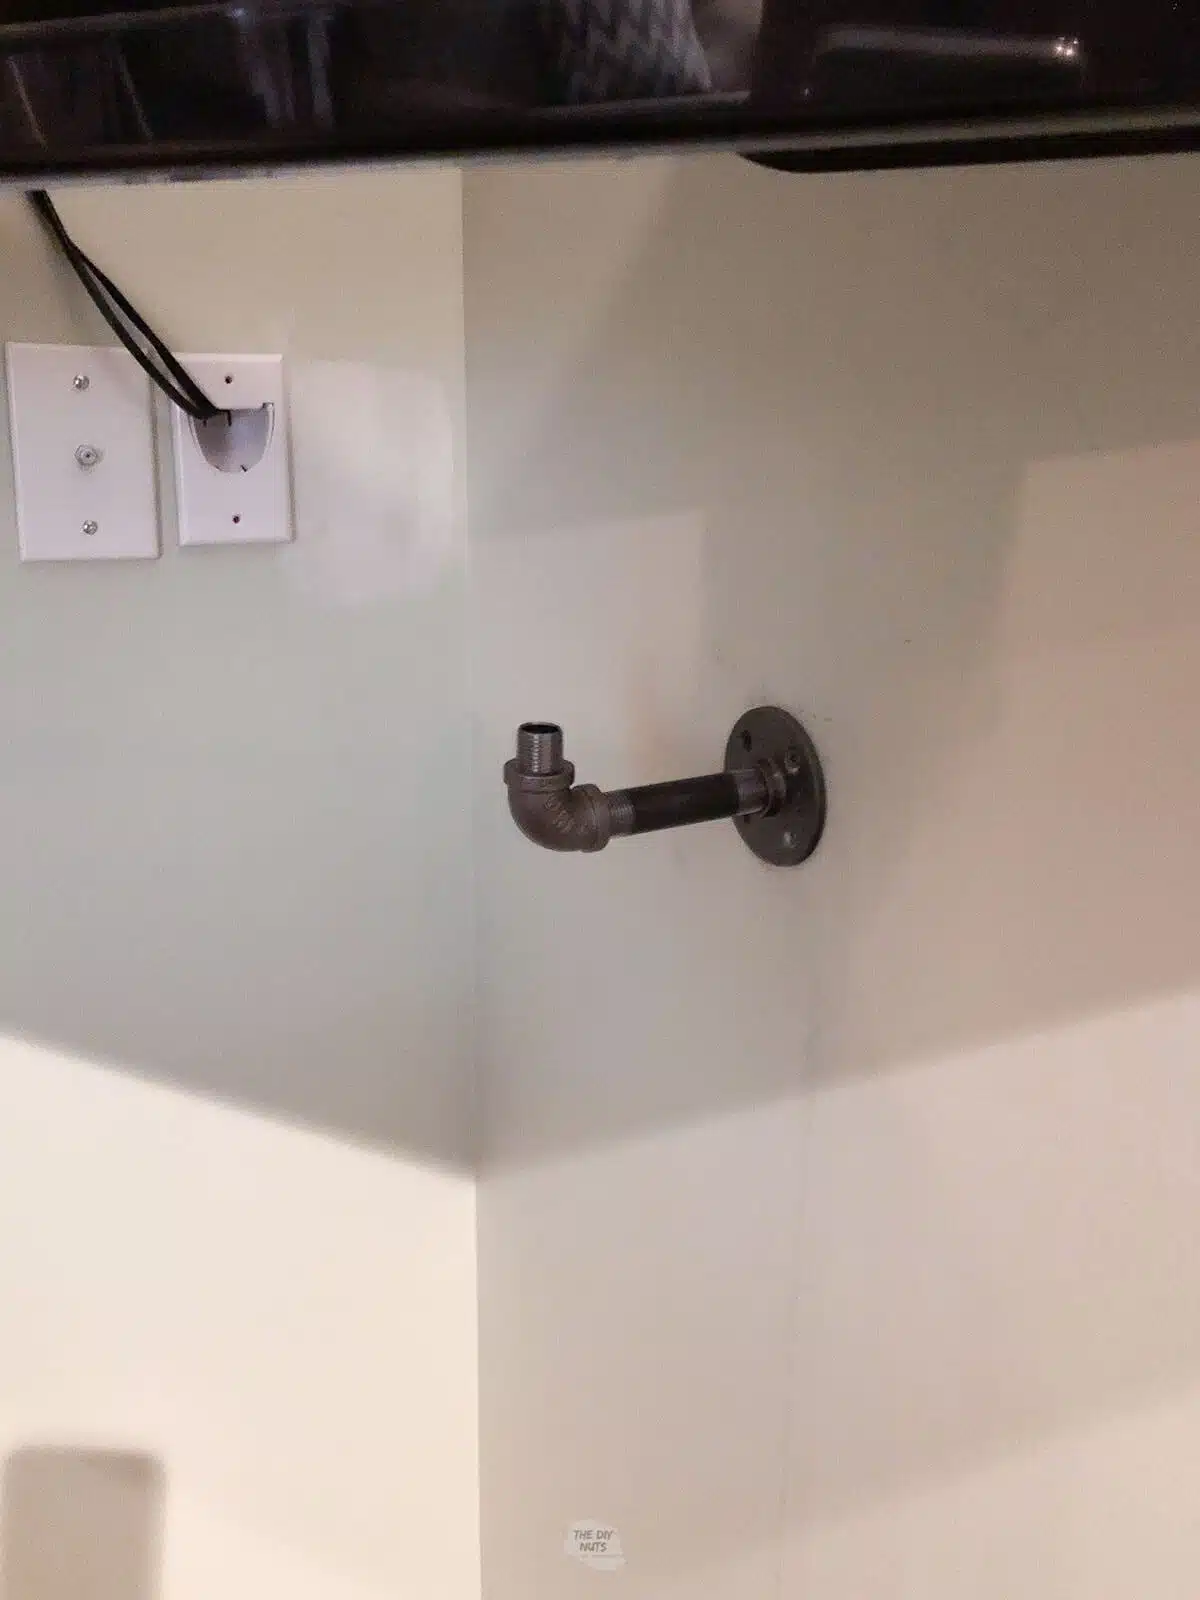 pipe fitting for shelf in wall corner under televsion.